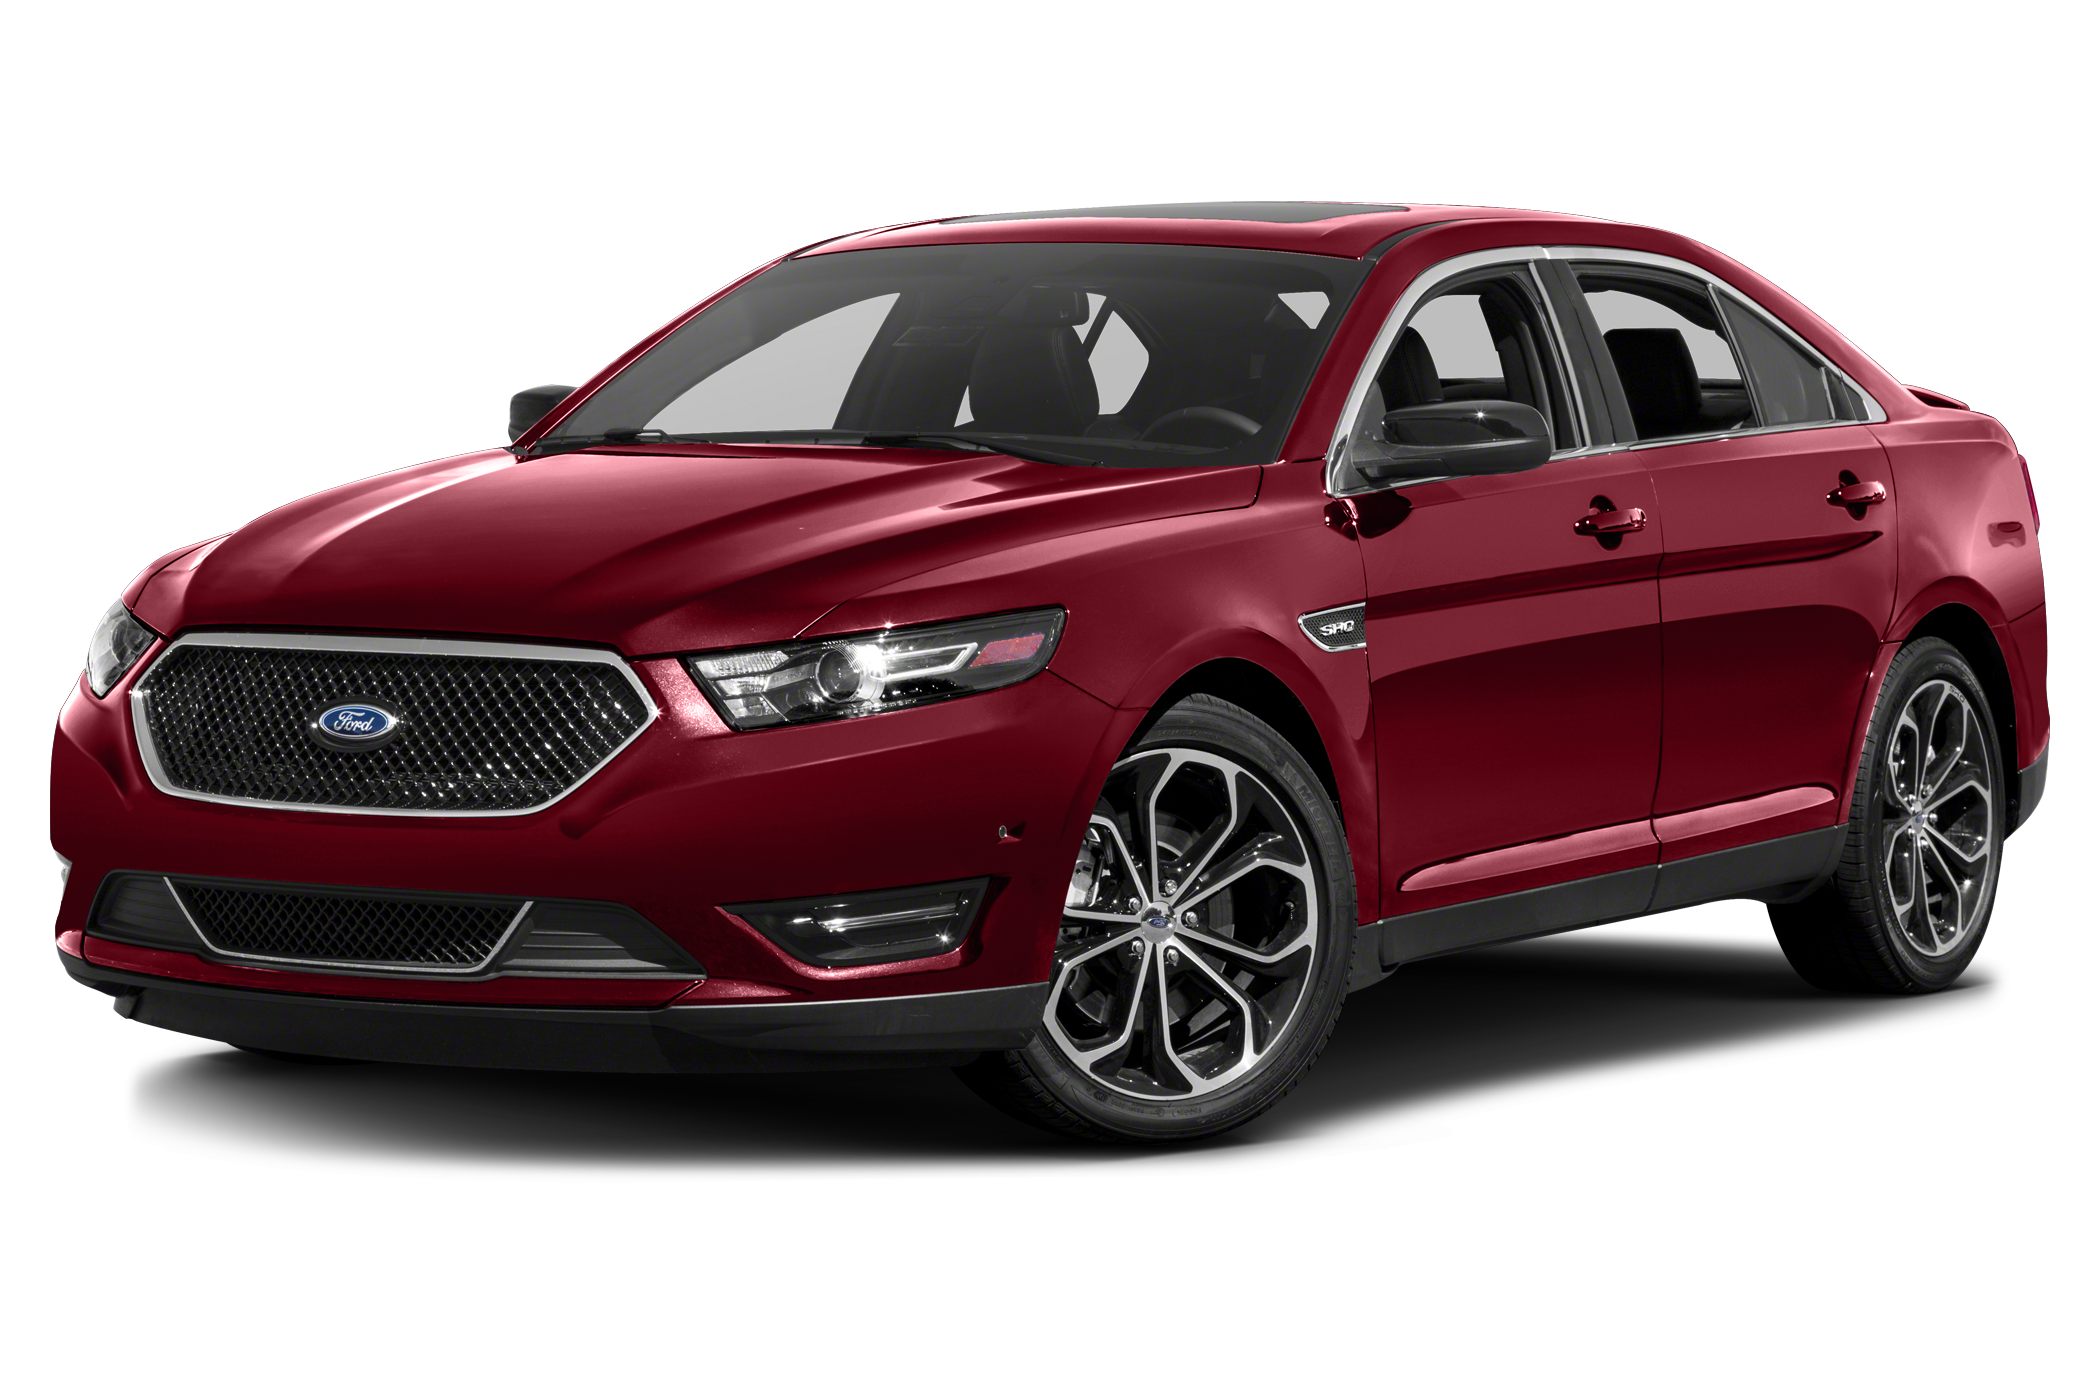 2013 Ford Taurus Sho 4dr All Wheel Drive Sedan Pictures